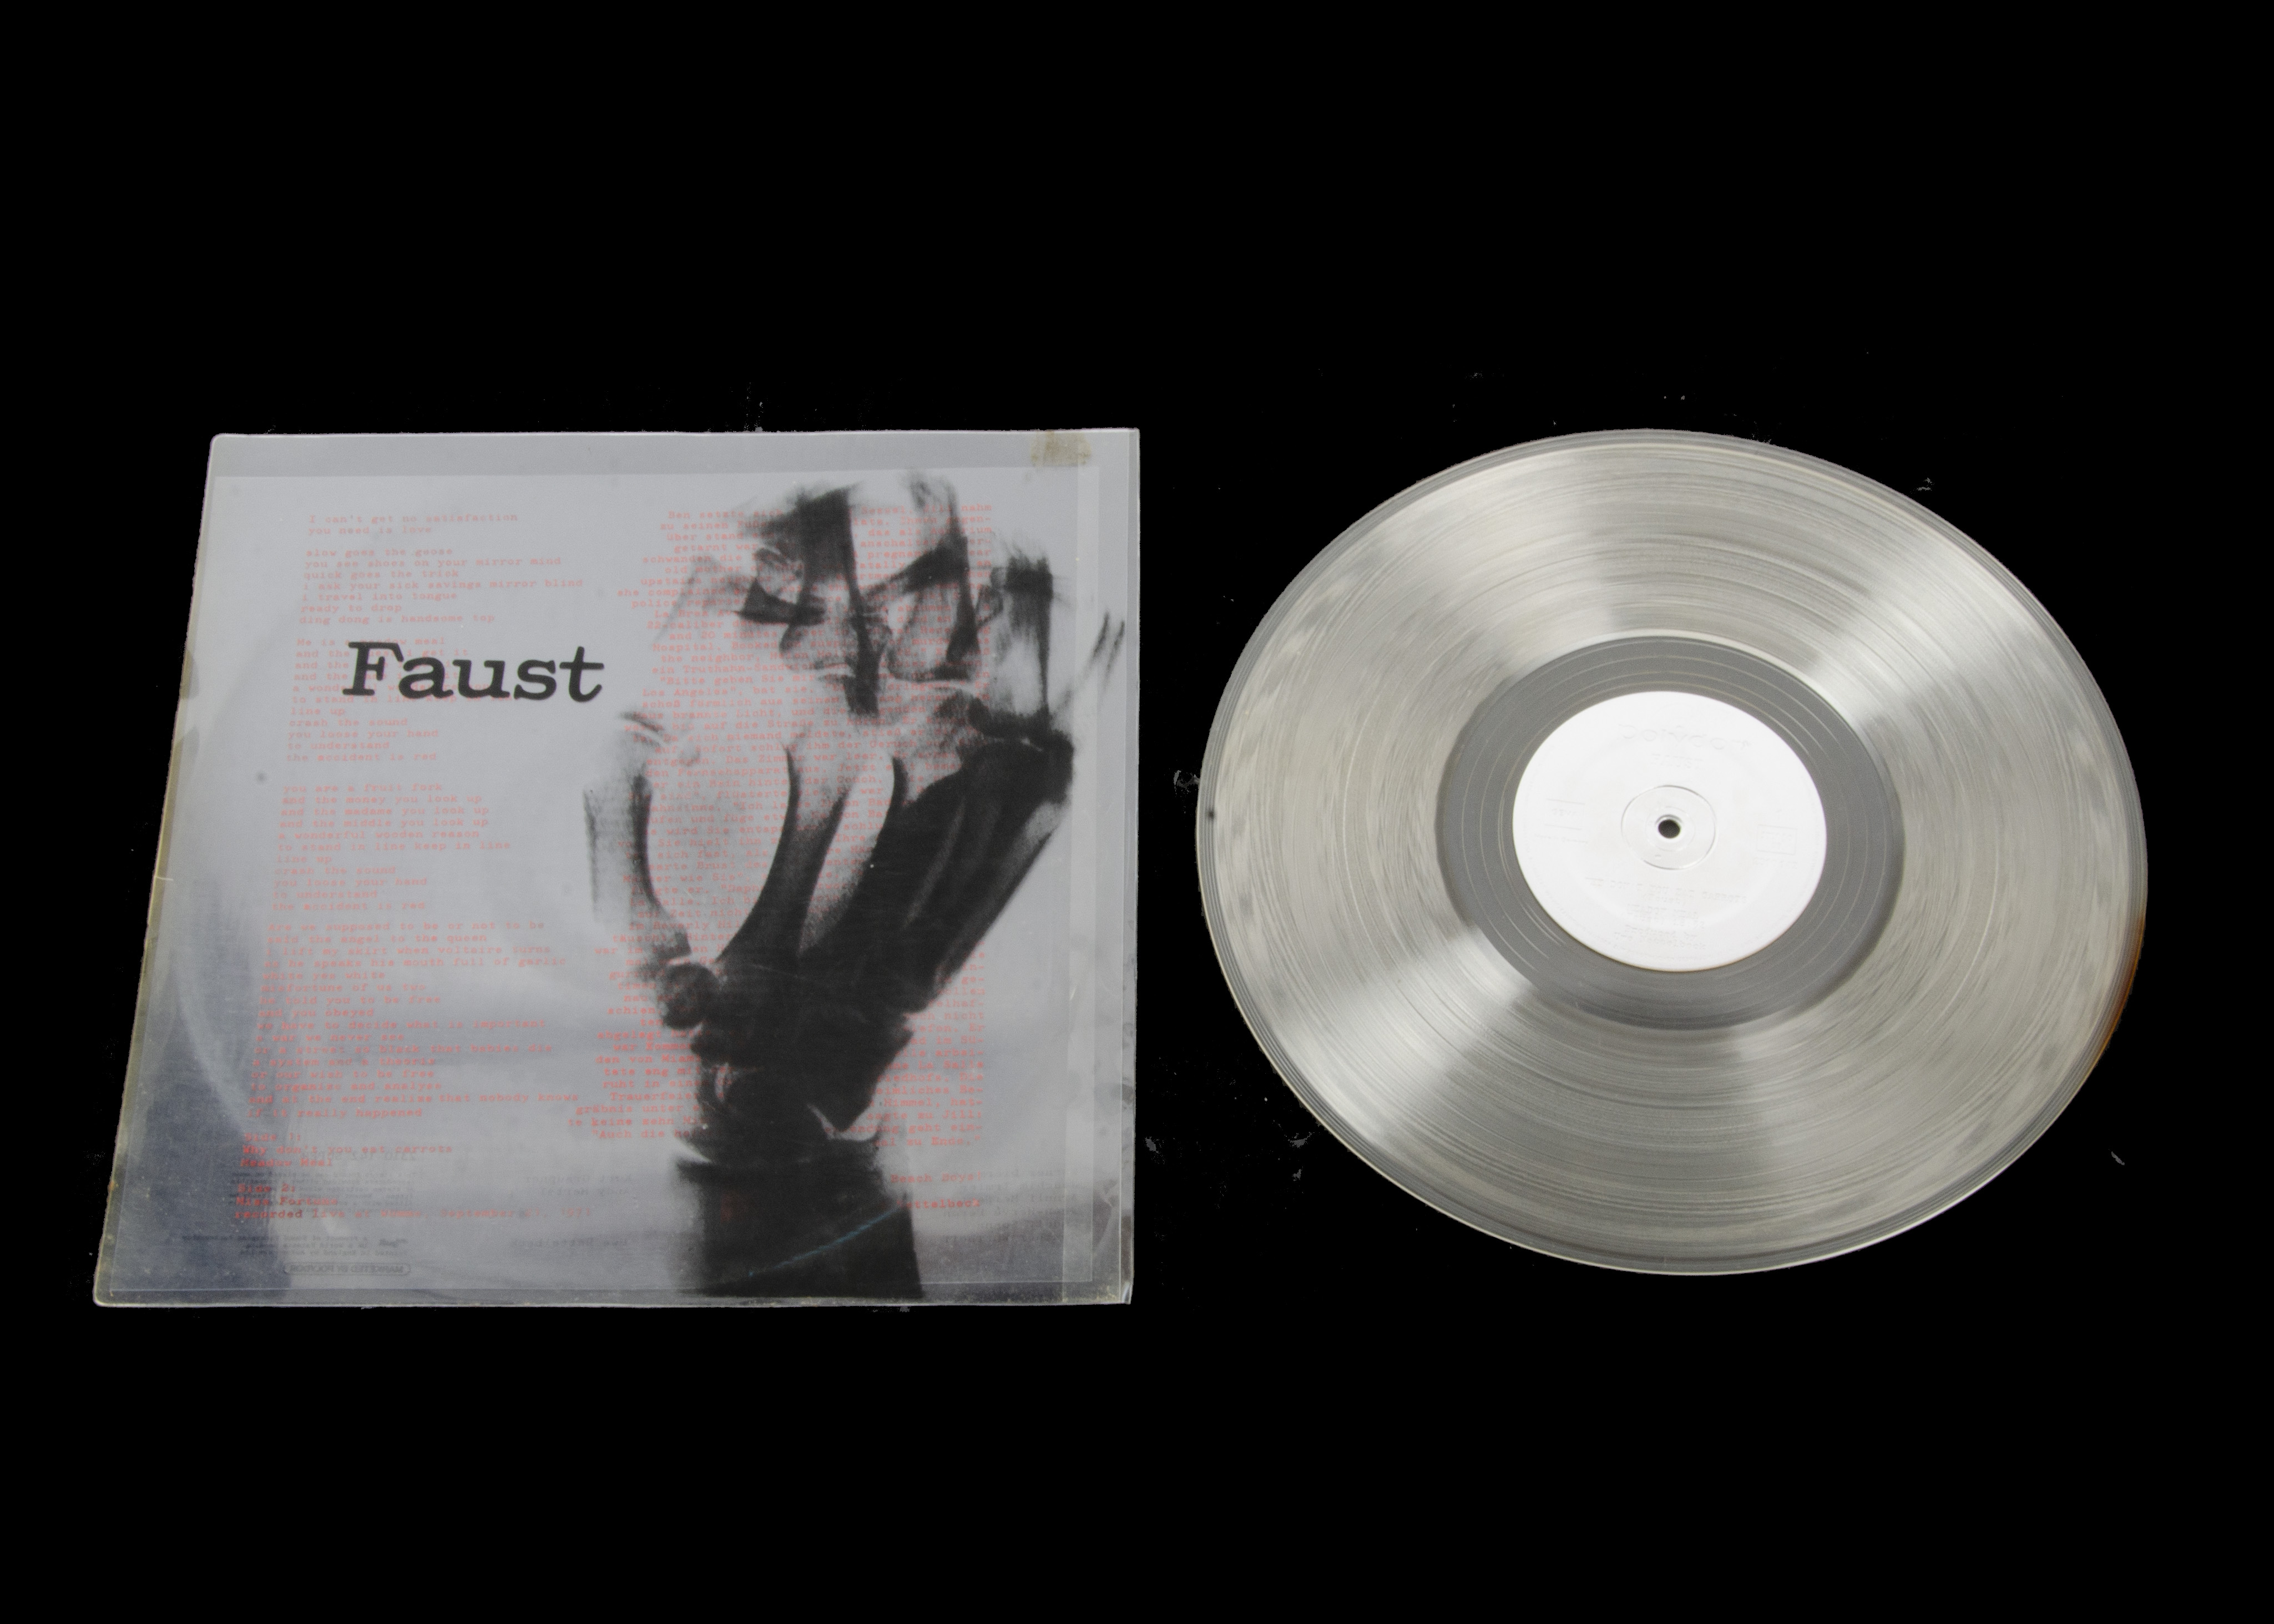 Faust LP, Faust LP - Original UK Release 1970 on Polydor (2310 142) - Clear Vinyl With Insert in